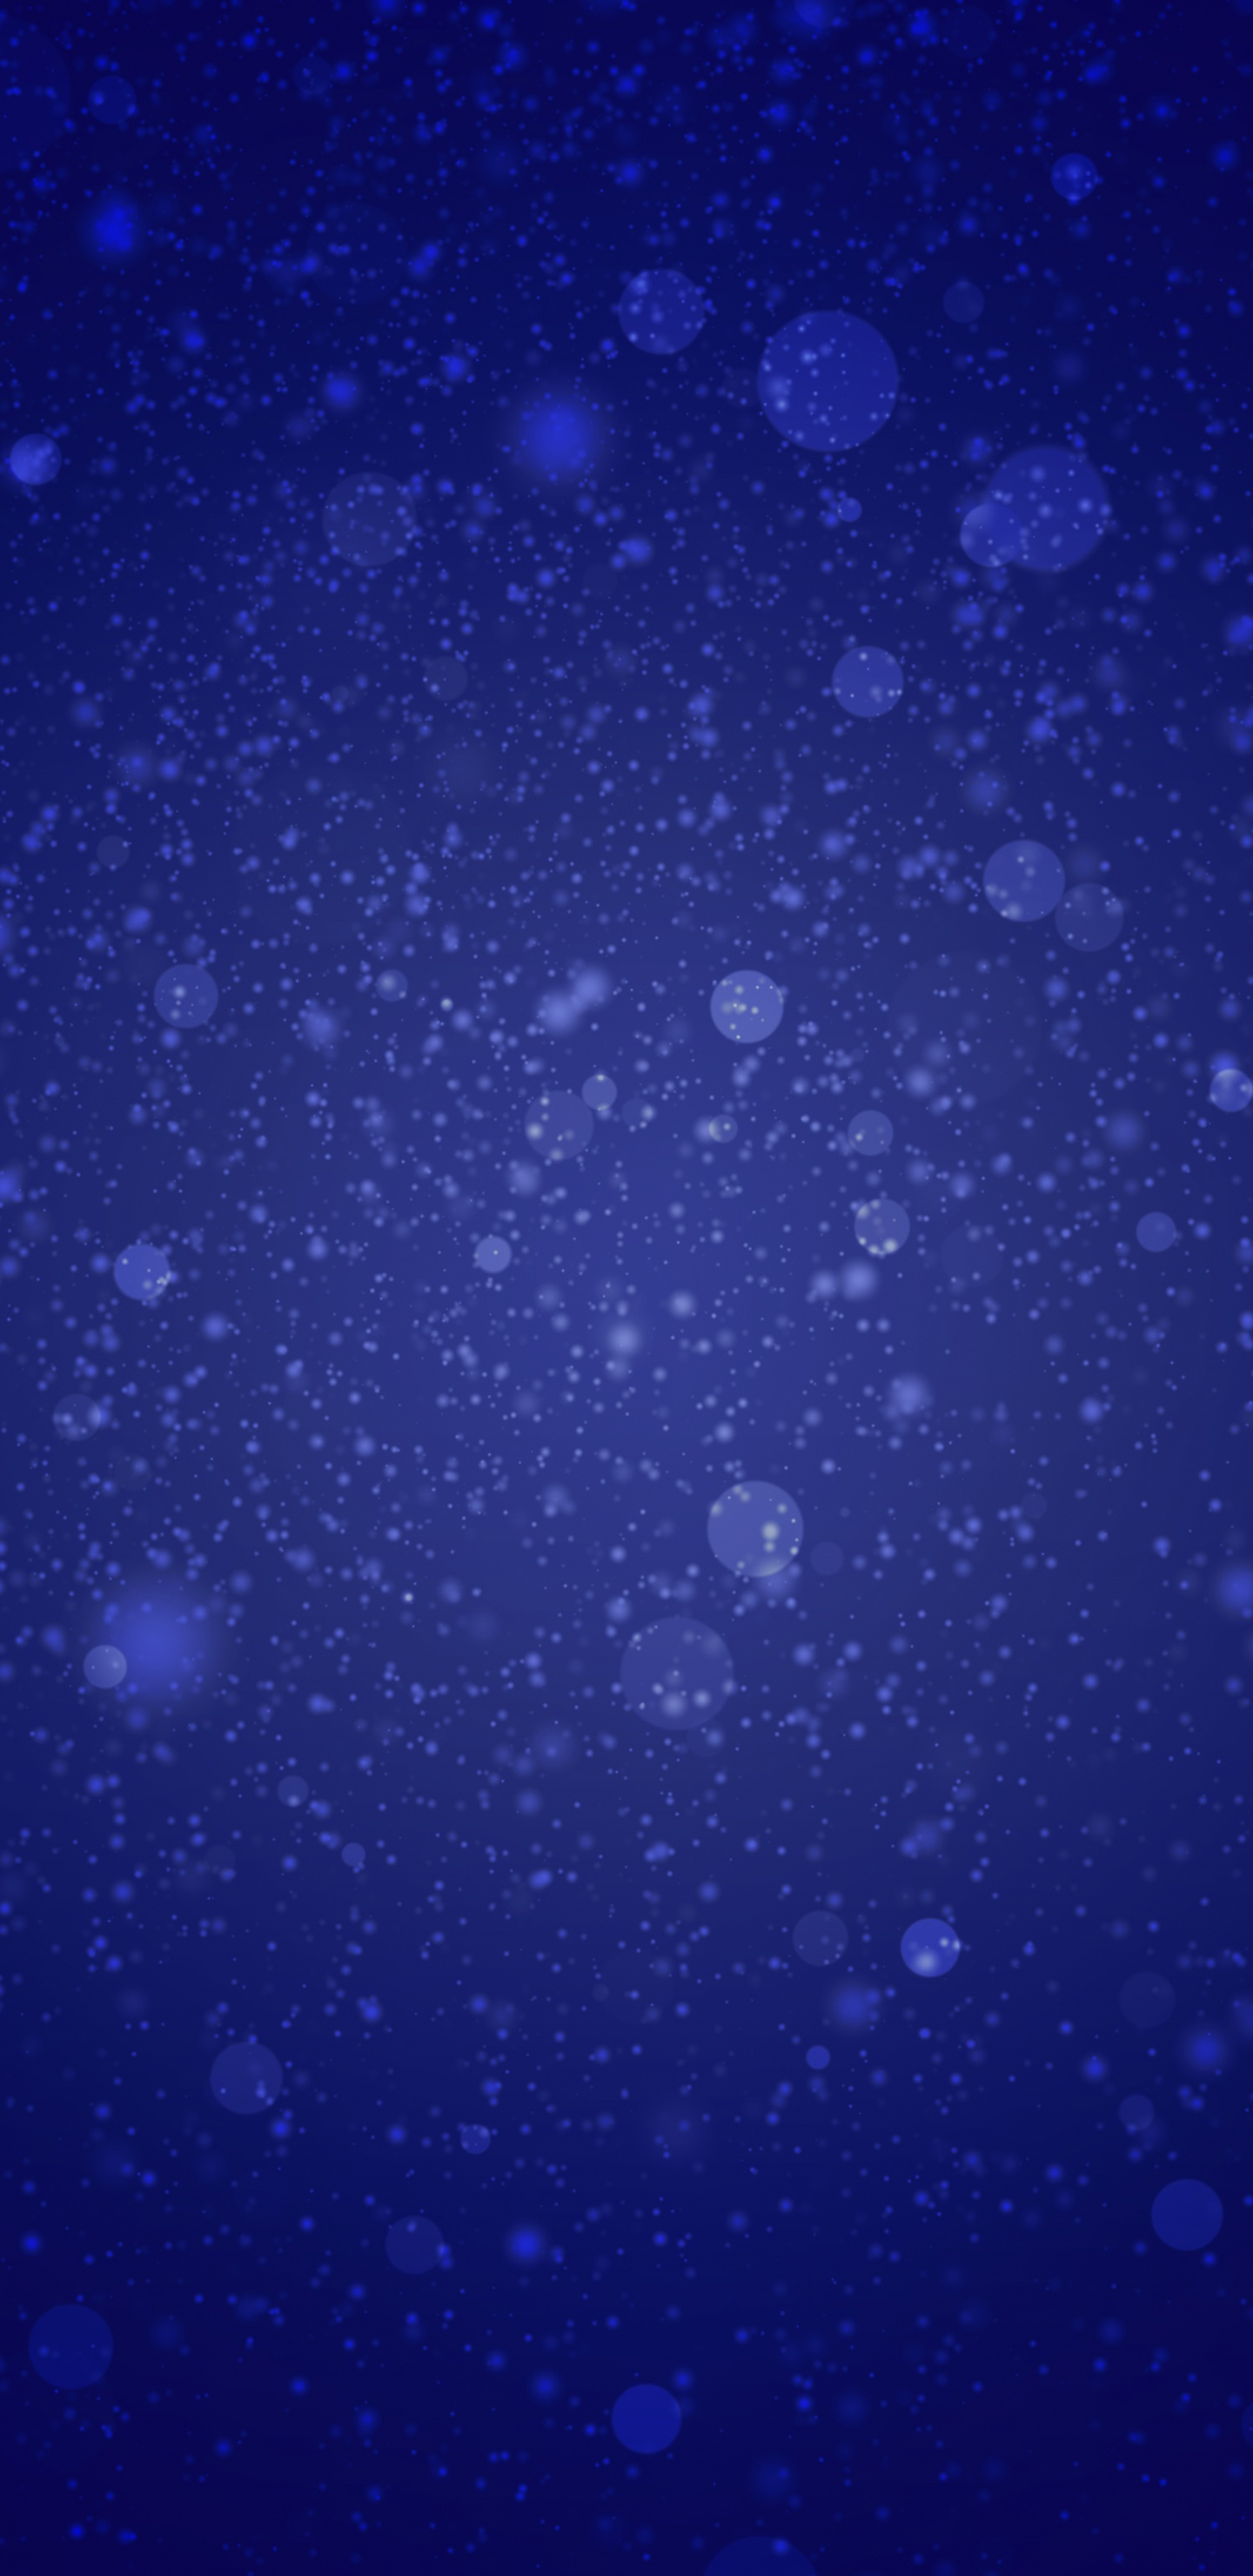 Blue and White Galaxy Illustration. Wallpaper in 1440x2960 Resolution